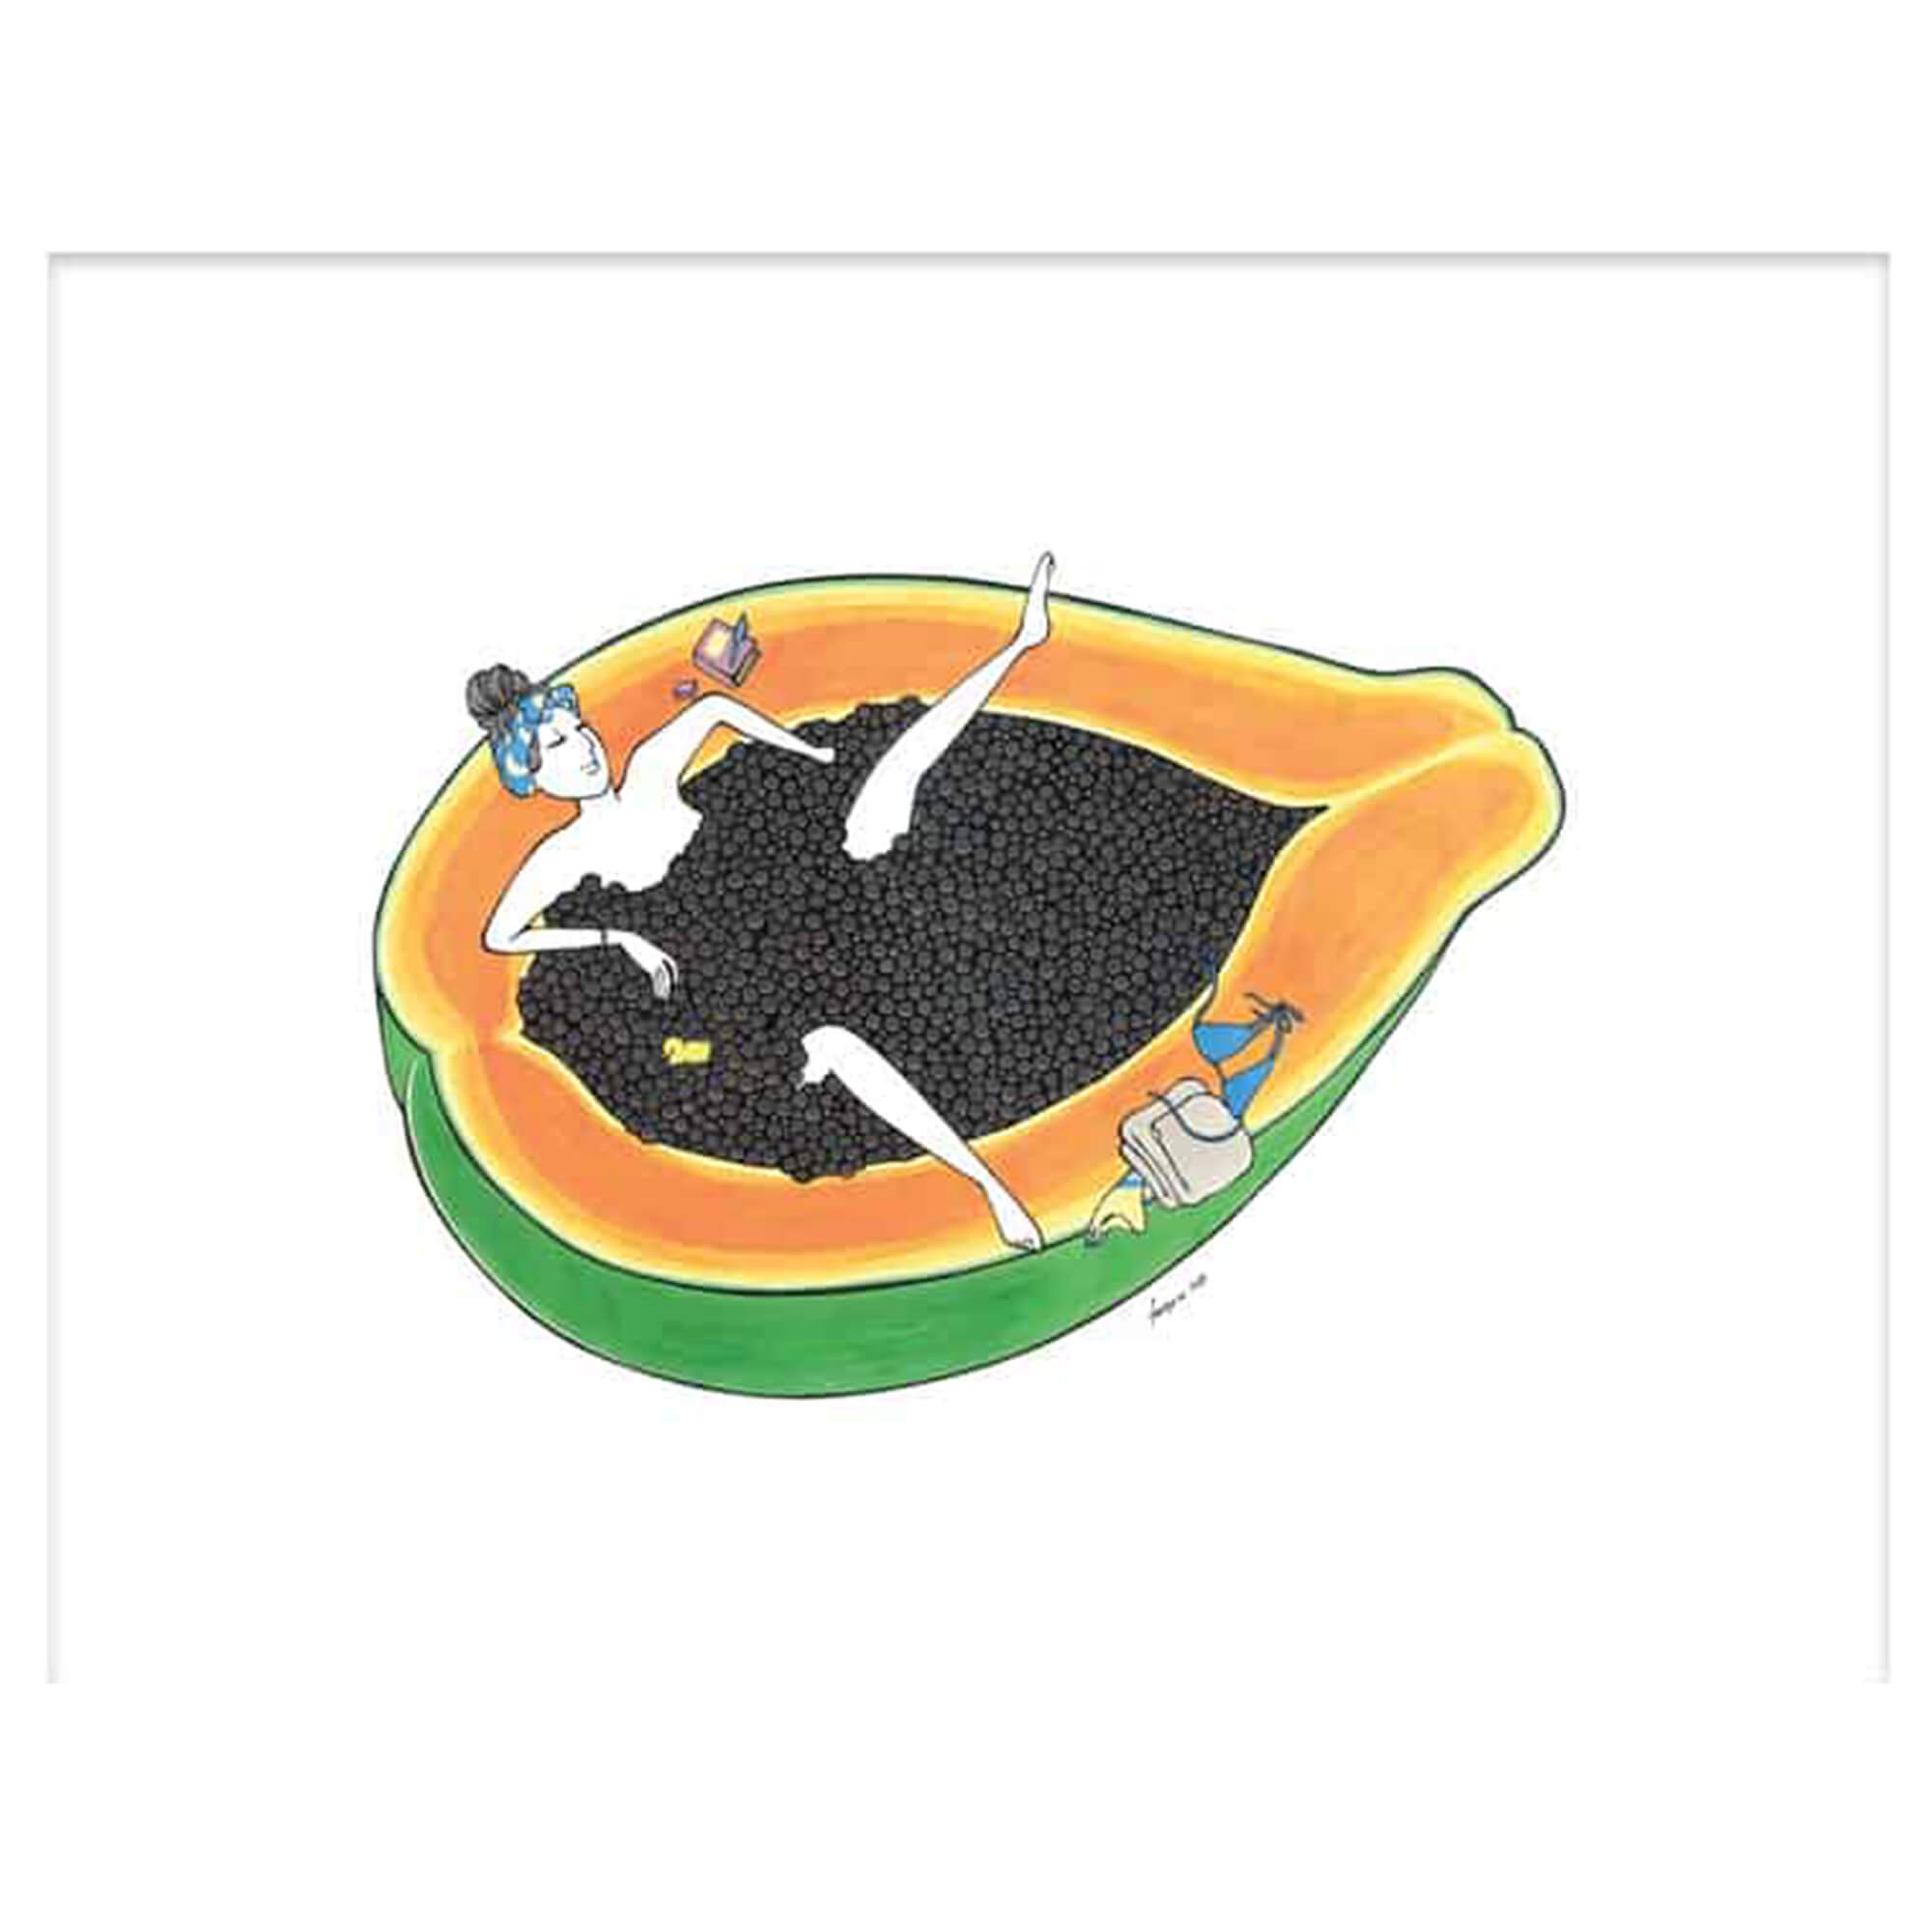 A matted art print  of a woman having a spa day and lounging in the seedy center of an orange papaya by Hawaii artist Kris Goto